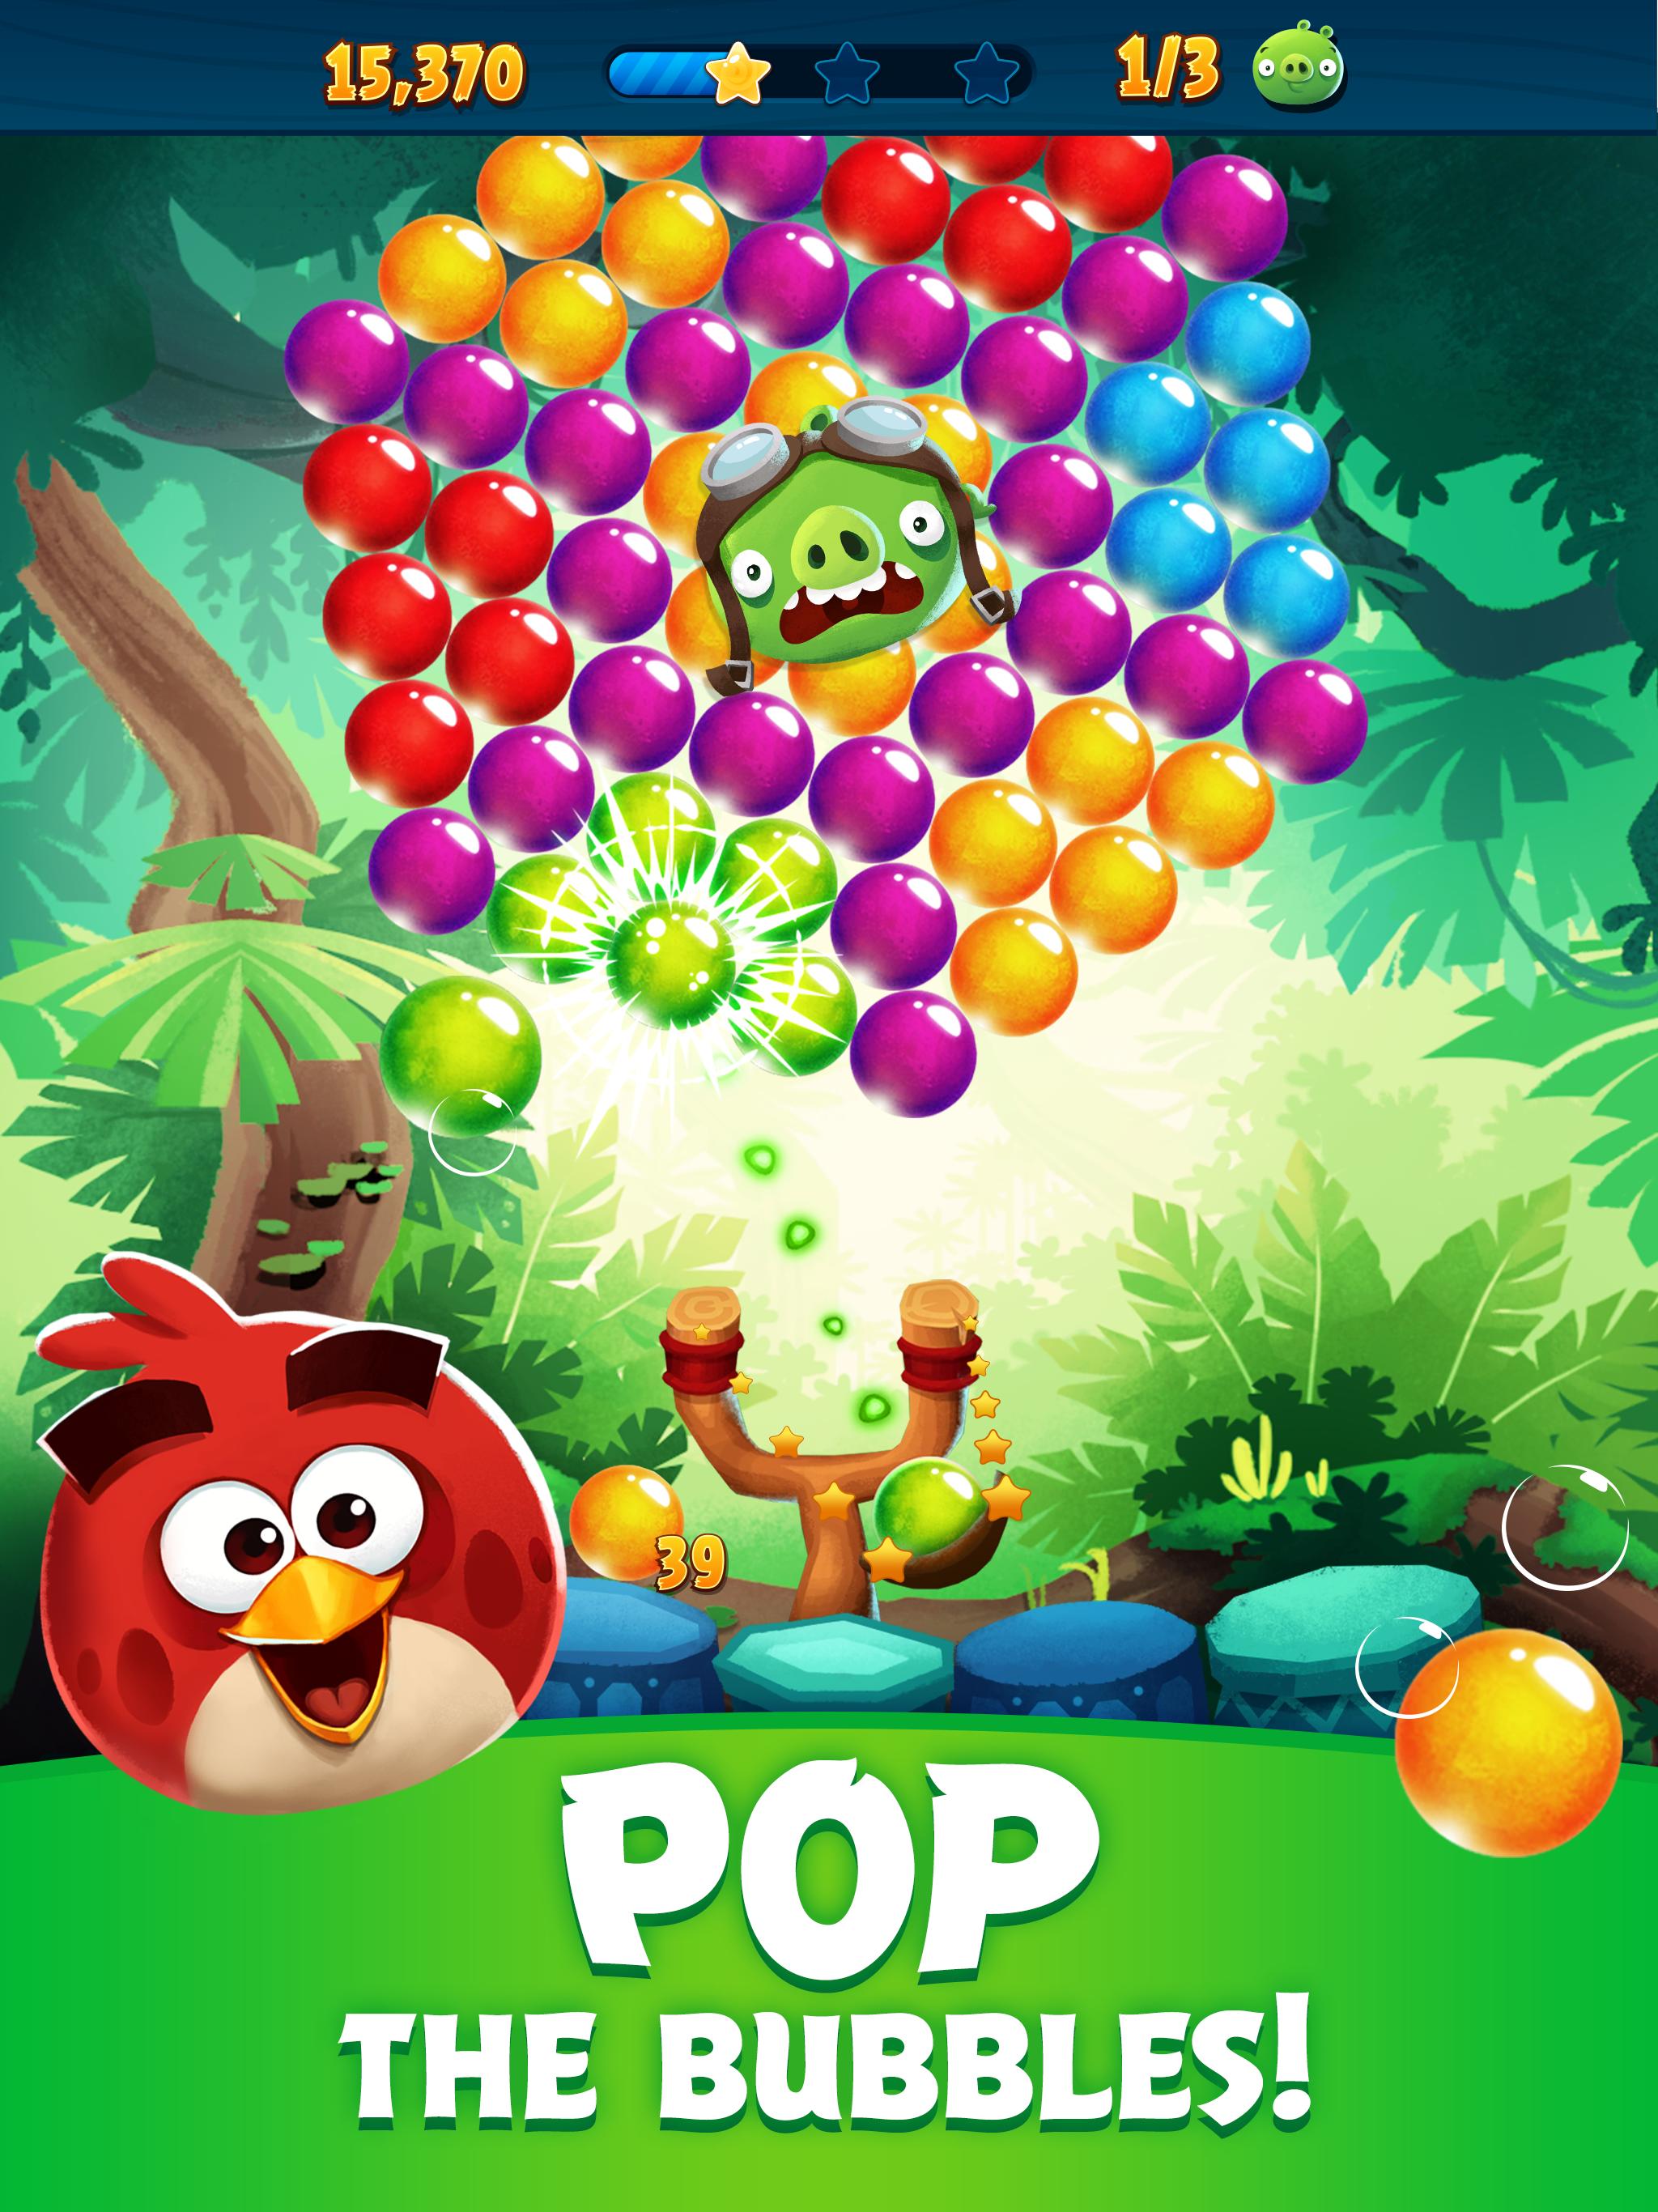 Angry Birds POP Bubble Shooter for Android - APK Download